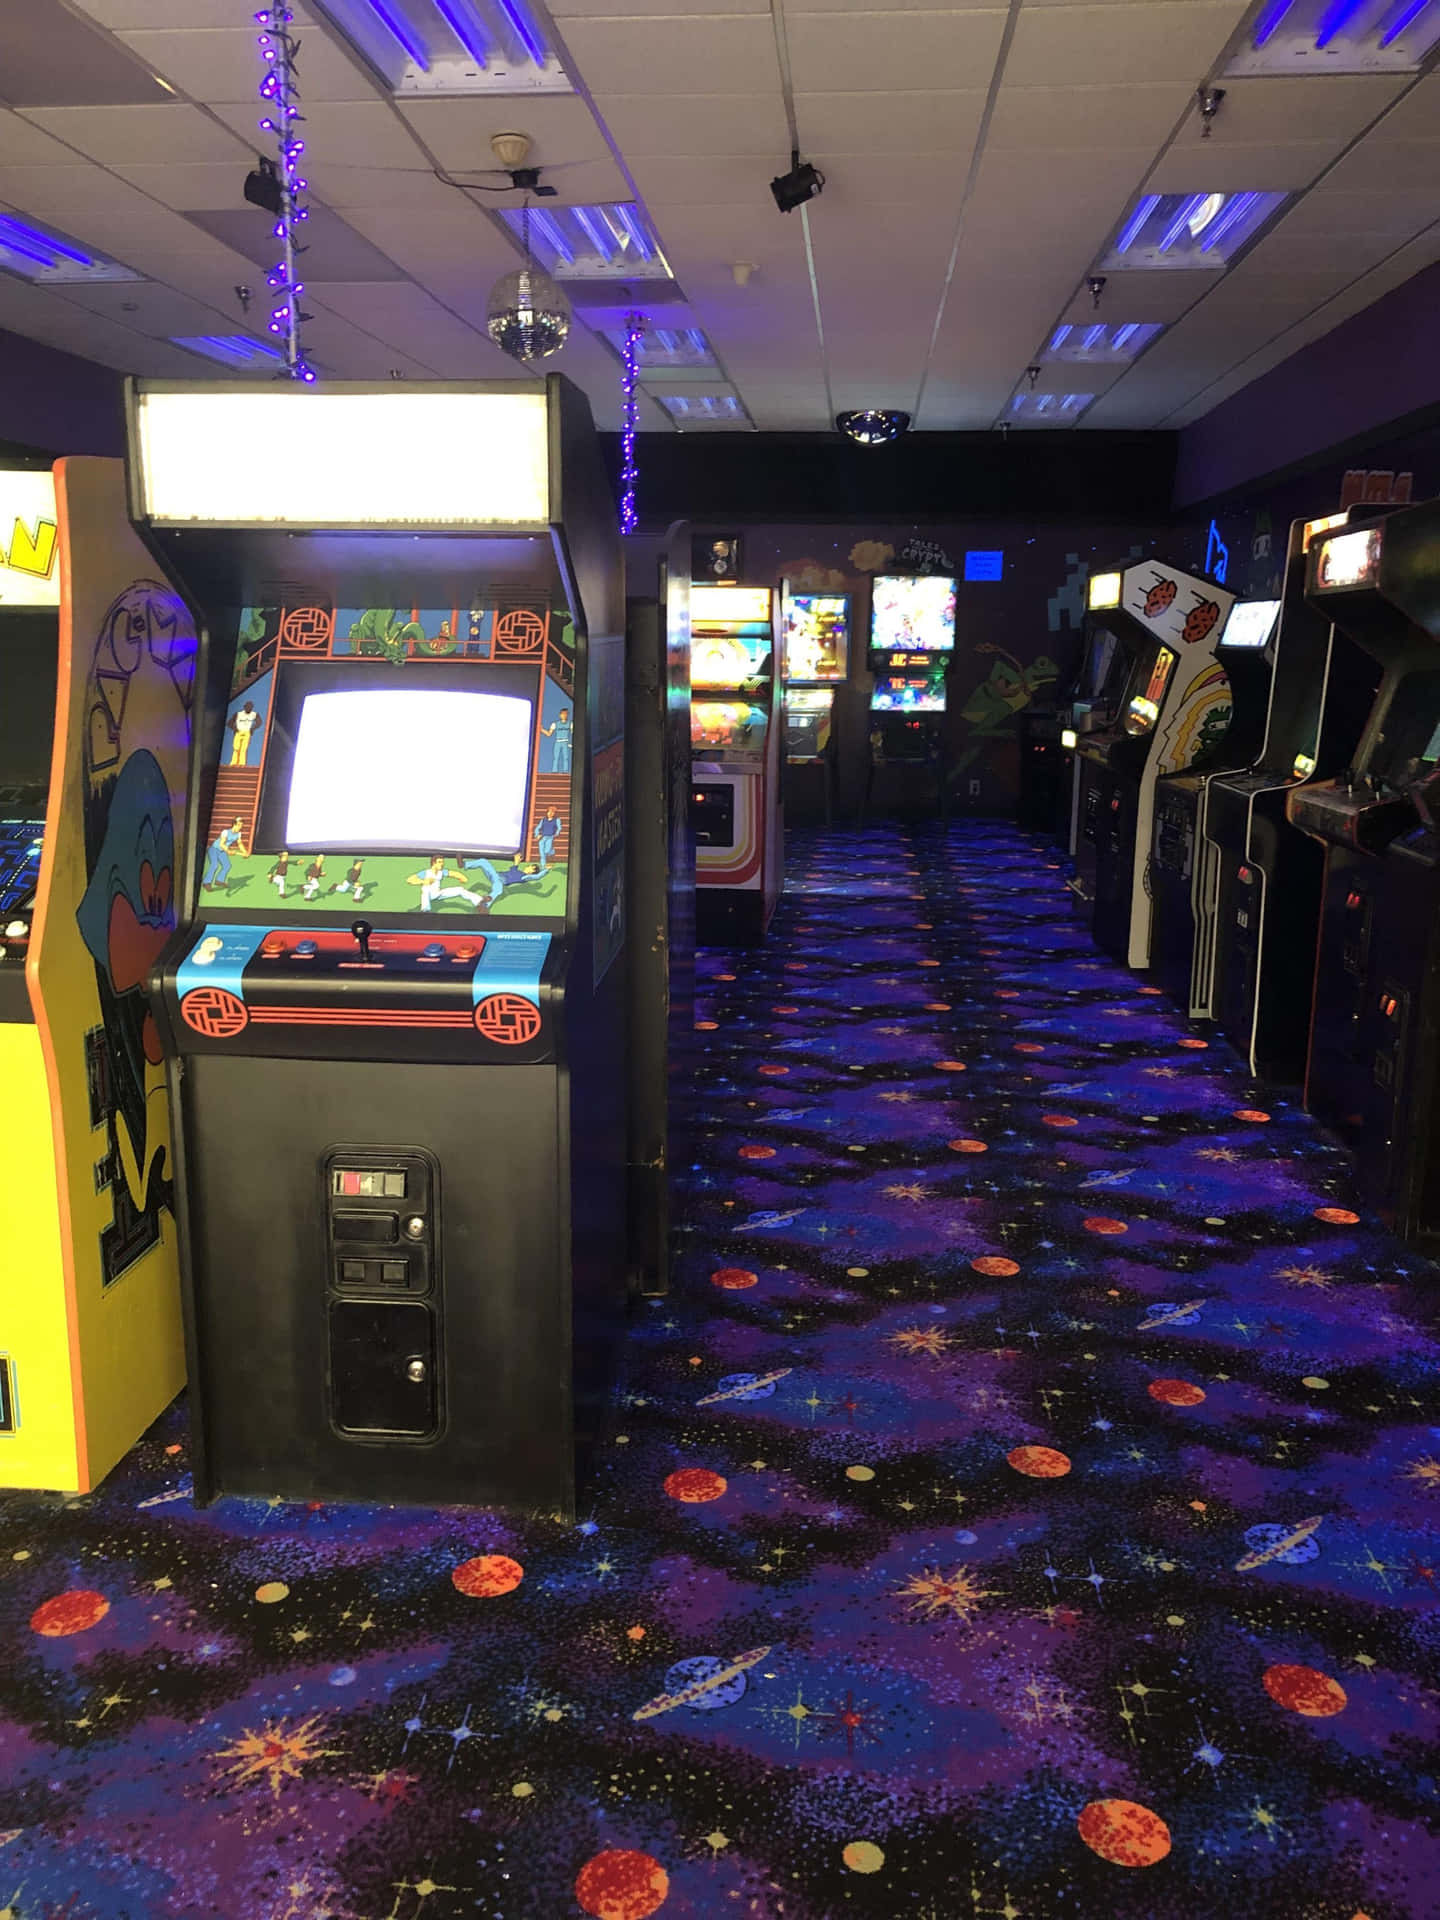 Download Arcade Machines In A Room With Purple Carpet Wallpaper